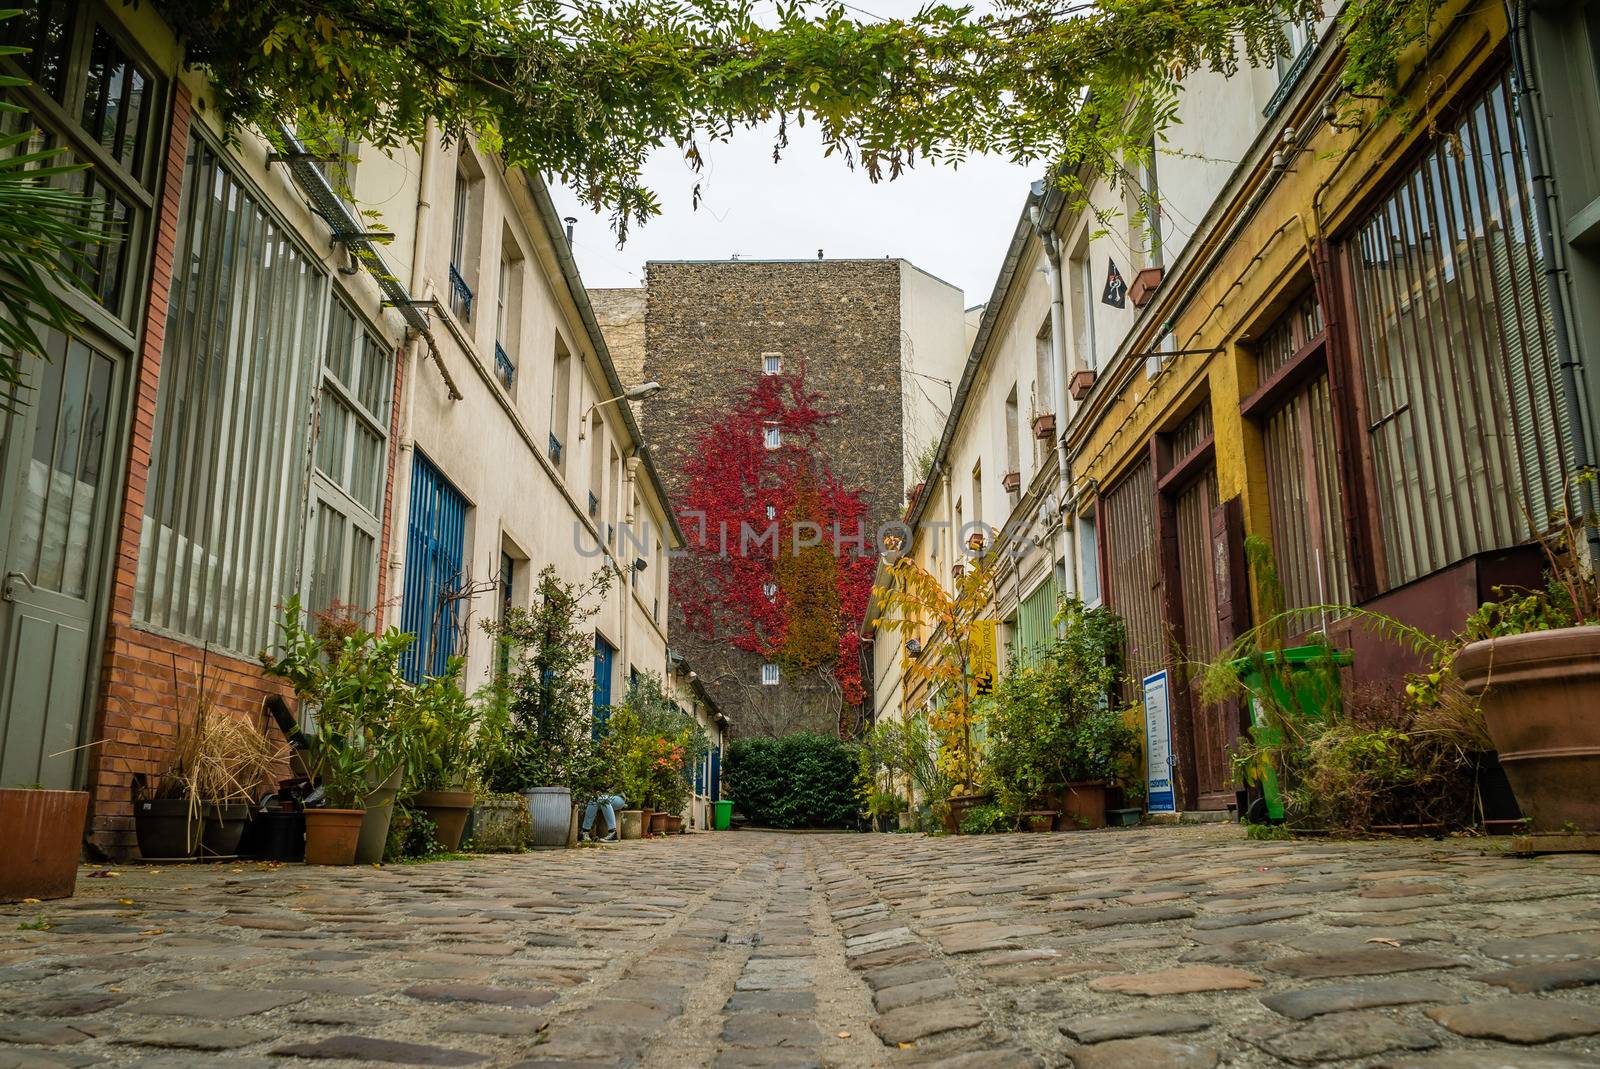 The Figuier street with its vegetation in Paris 11th district